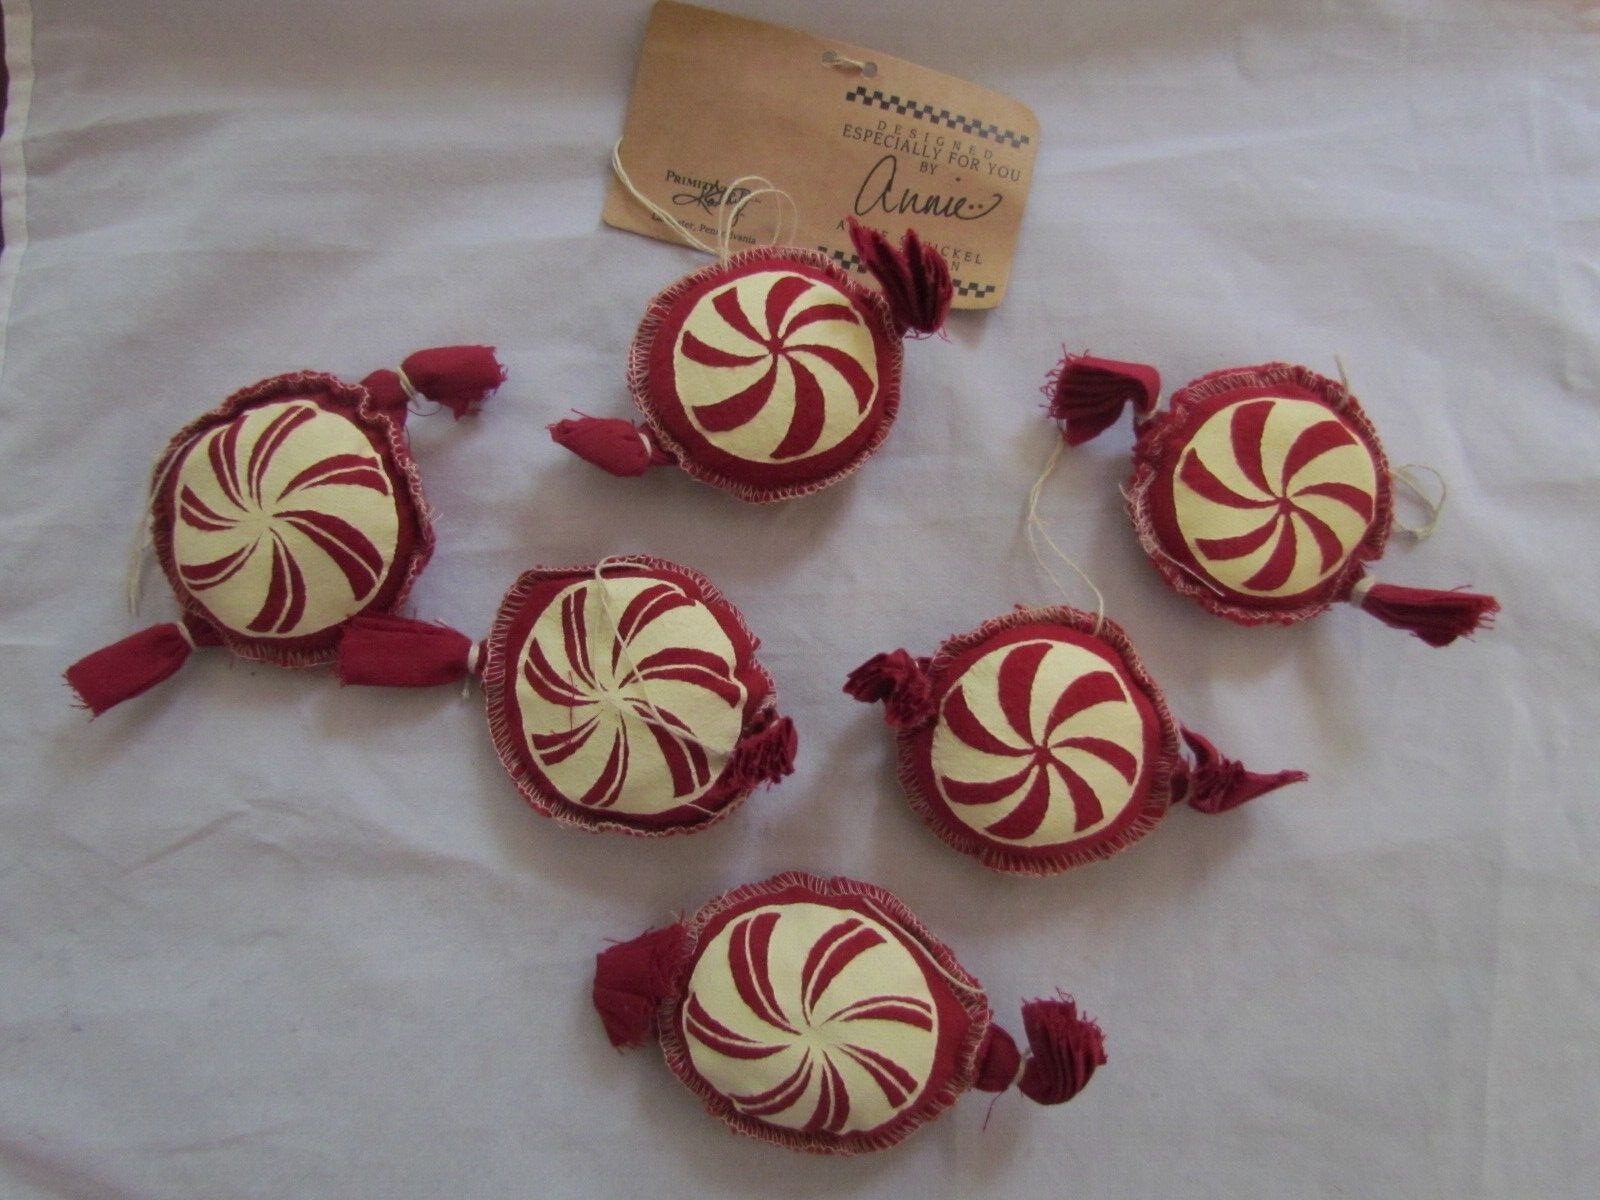 PEPPERMINT CANDY Ornament 6pc Primitives by Kathy vintage style graphic 16693